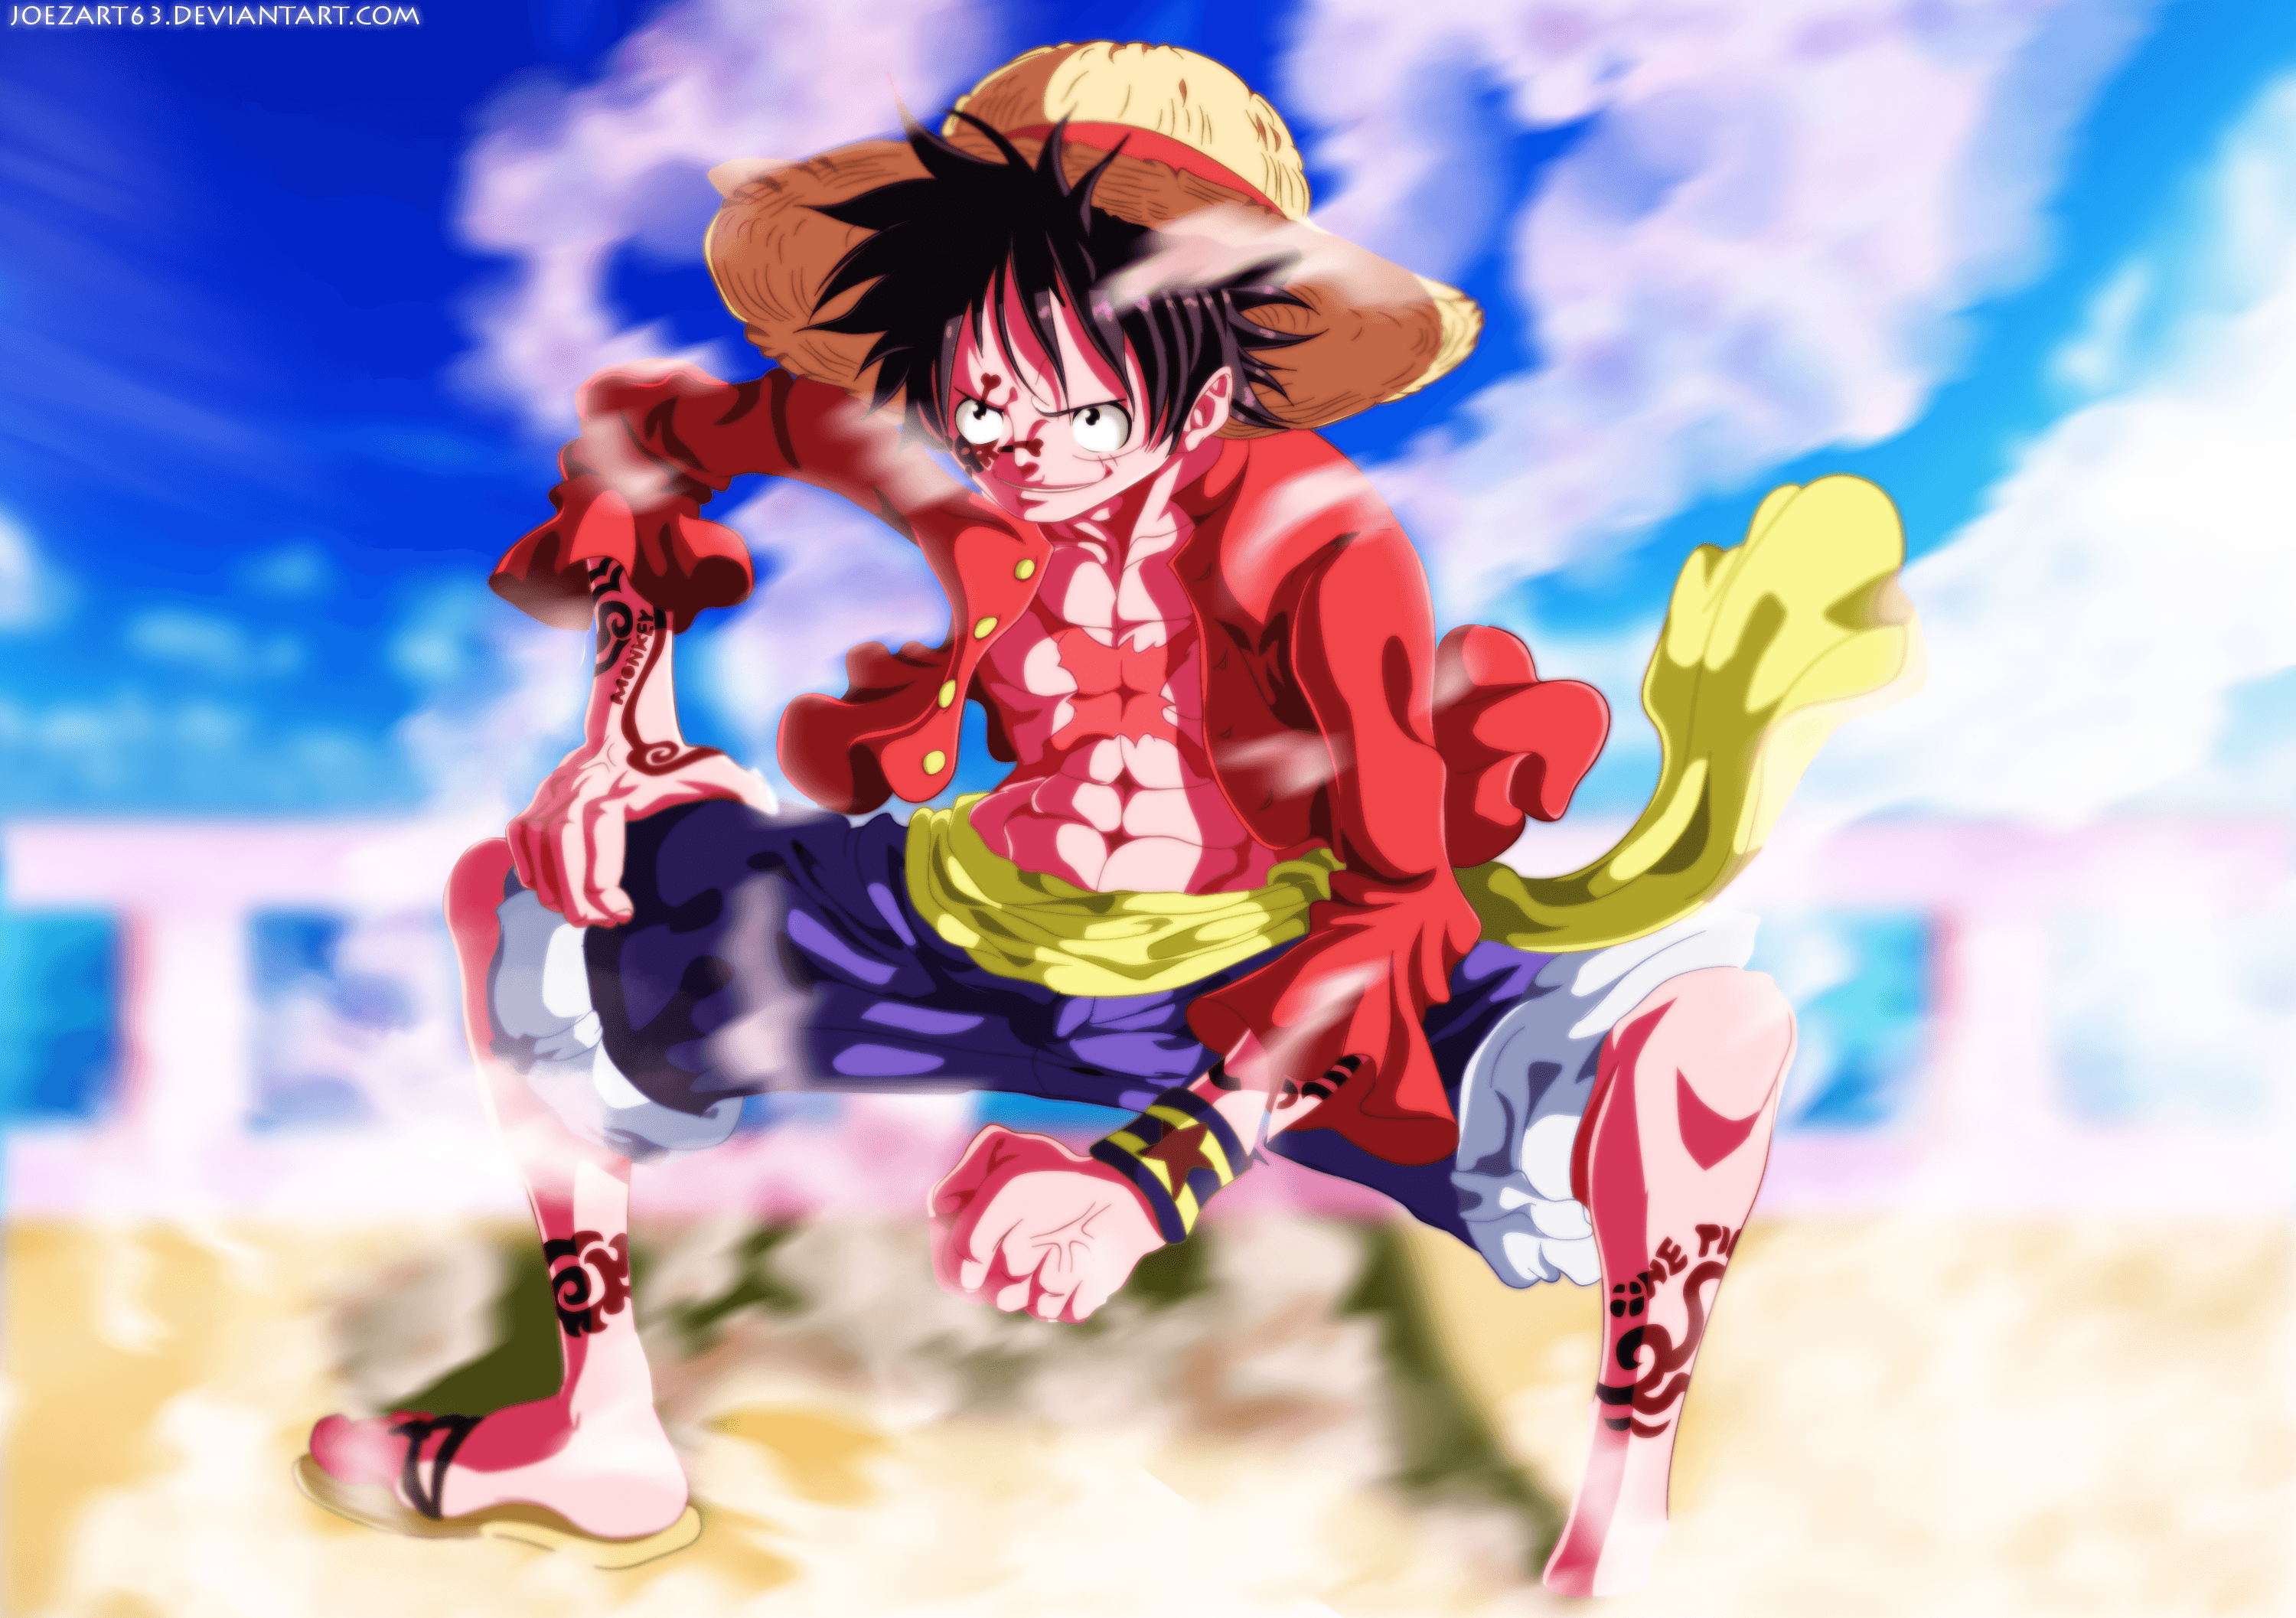 Monkey D. Luffy wallpapers and backgrounds.